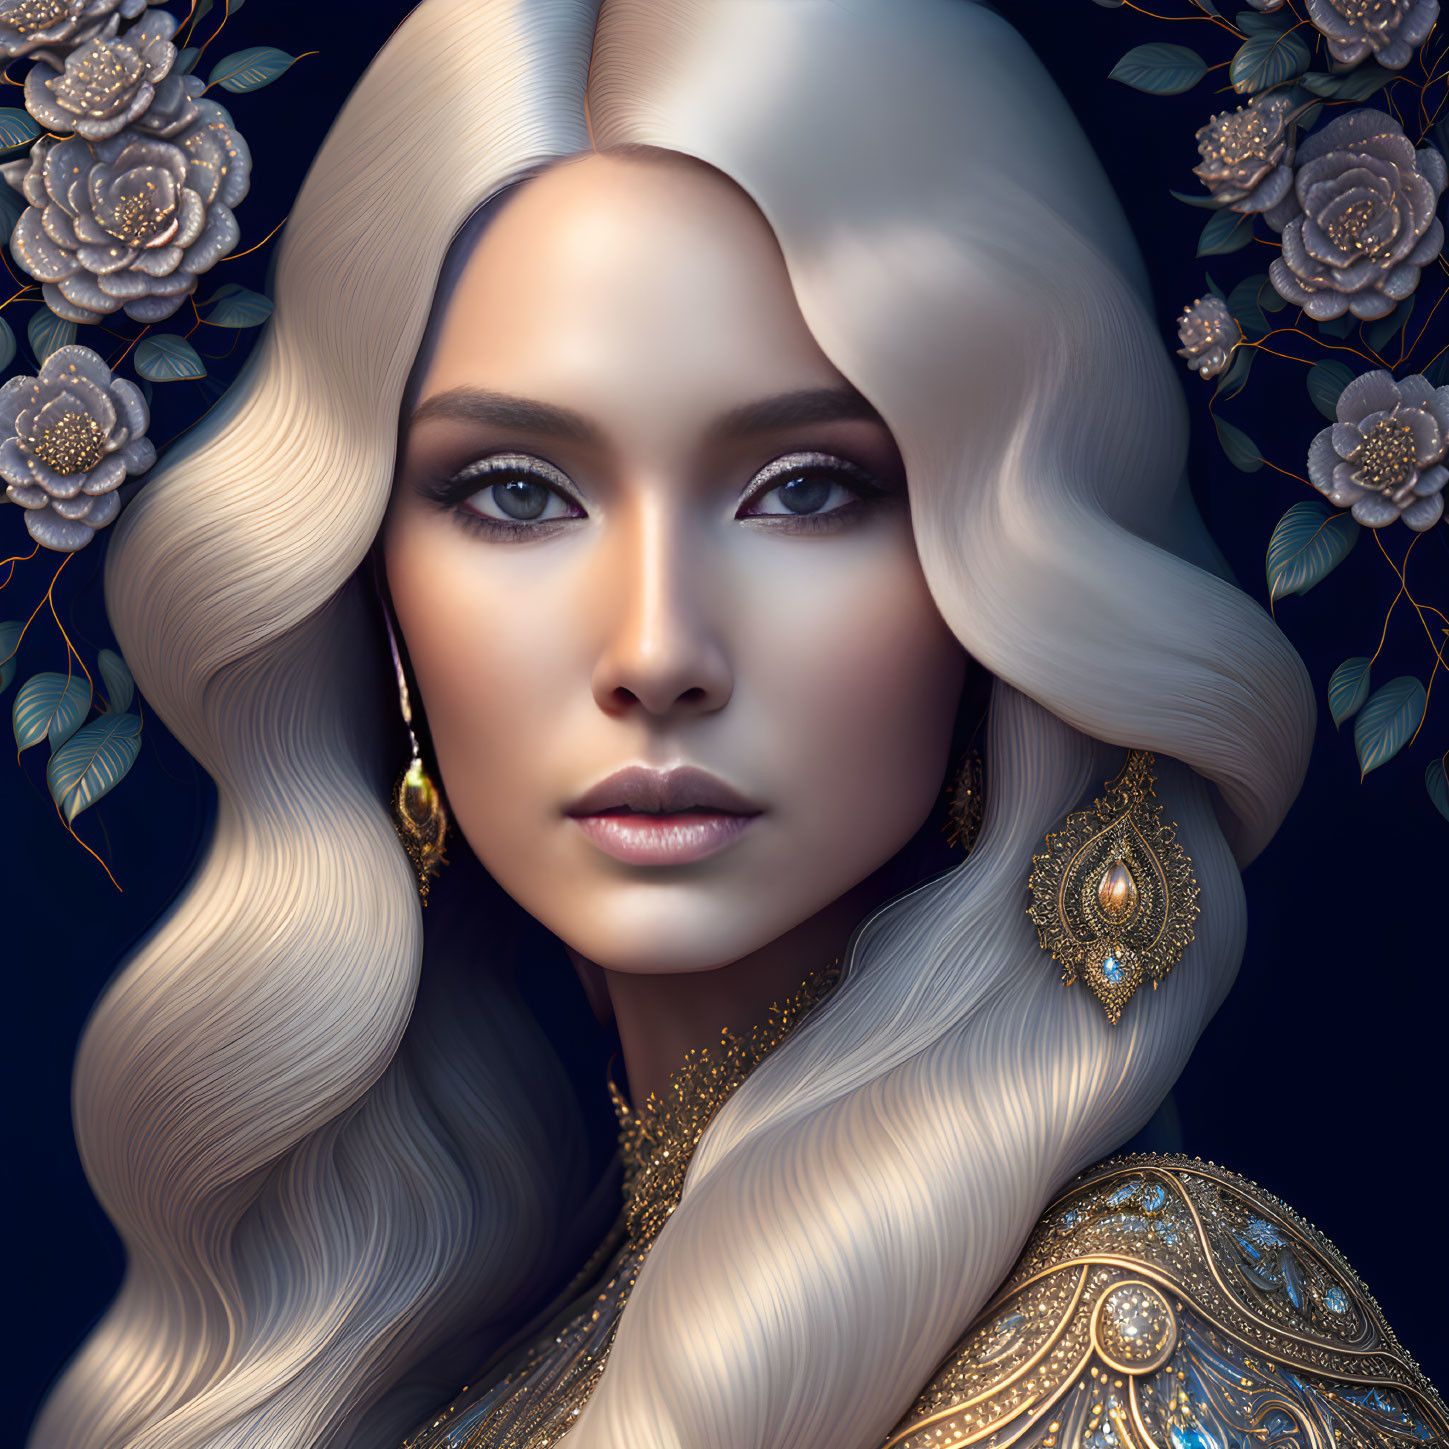 Detailed portrait of woman with long white hair and golden dress adorned with patterns and earrings, featuring stylized